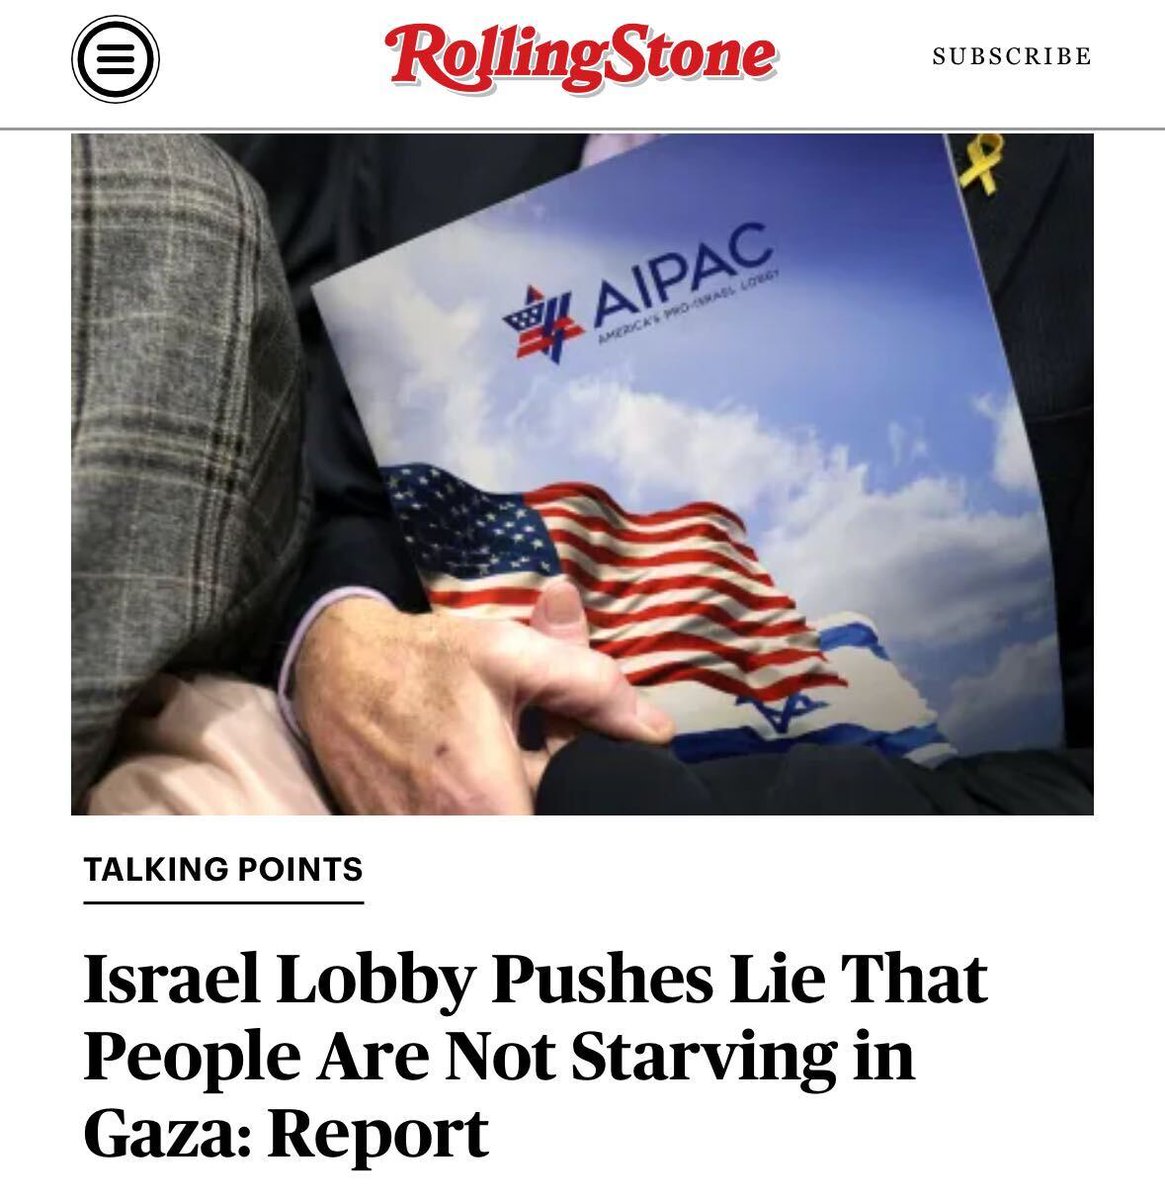 This week, Washington’s top Israel lobby is rallying its supporters to go to Capitol Hill and falsely claim to lawmakers that people aren’t starving in Gaza and Israel isn’t blocking aid shipments. Story: rollingstone.com/politics/polit…